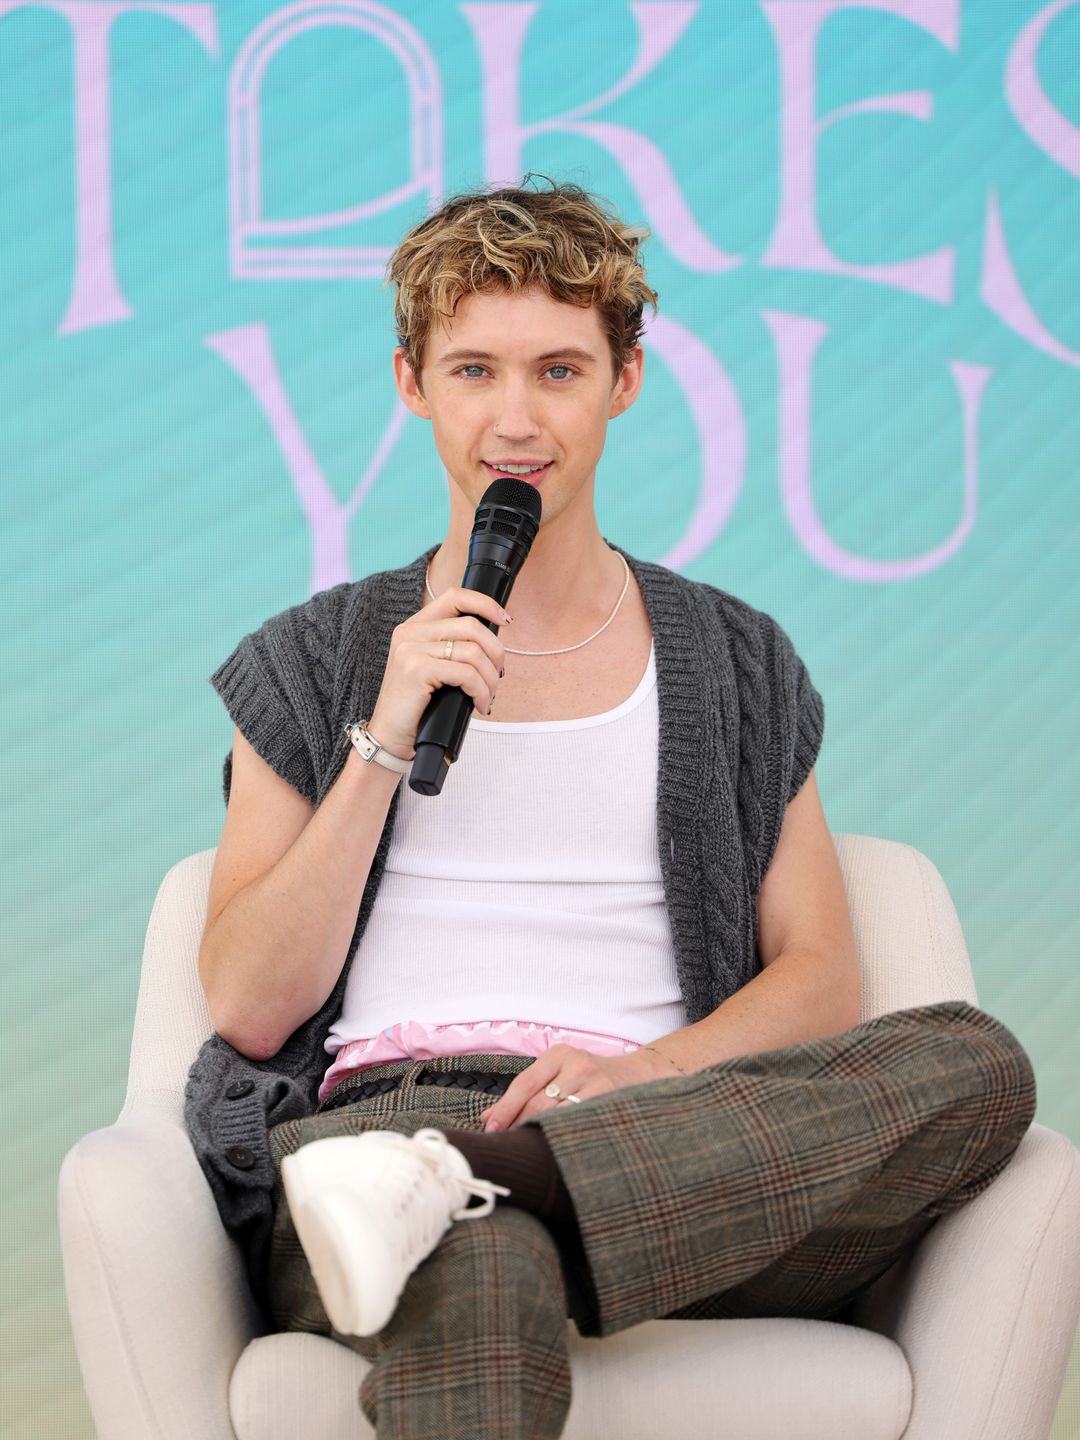 Troye Sivan holding a microphone in woollen jacket and white top